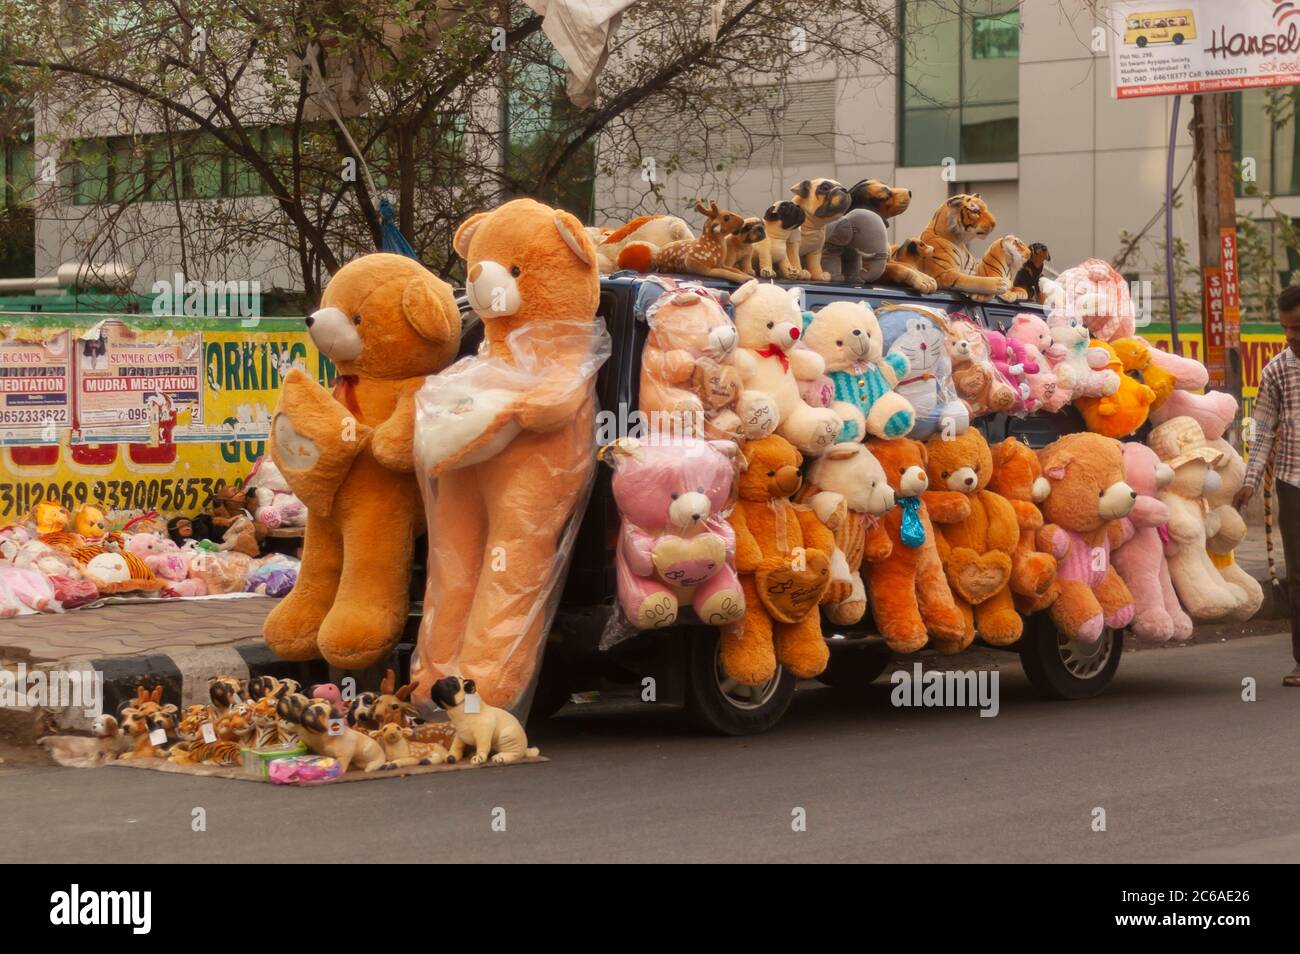 A street vendor selling an assortment of stuffed toys but the side of the road. Hyderabad, Telangana, India. Stock Photo